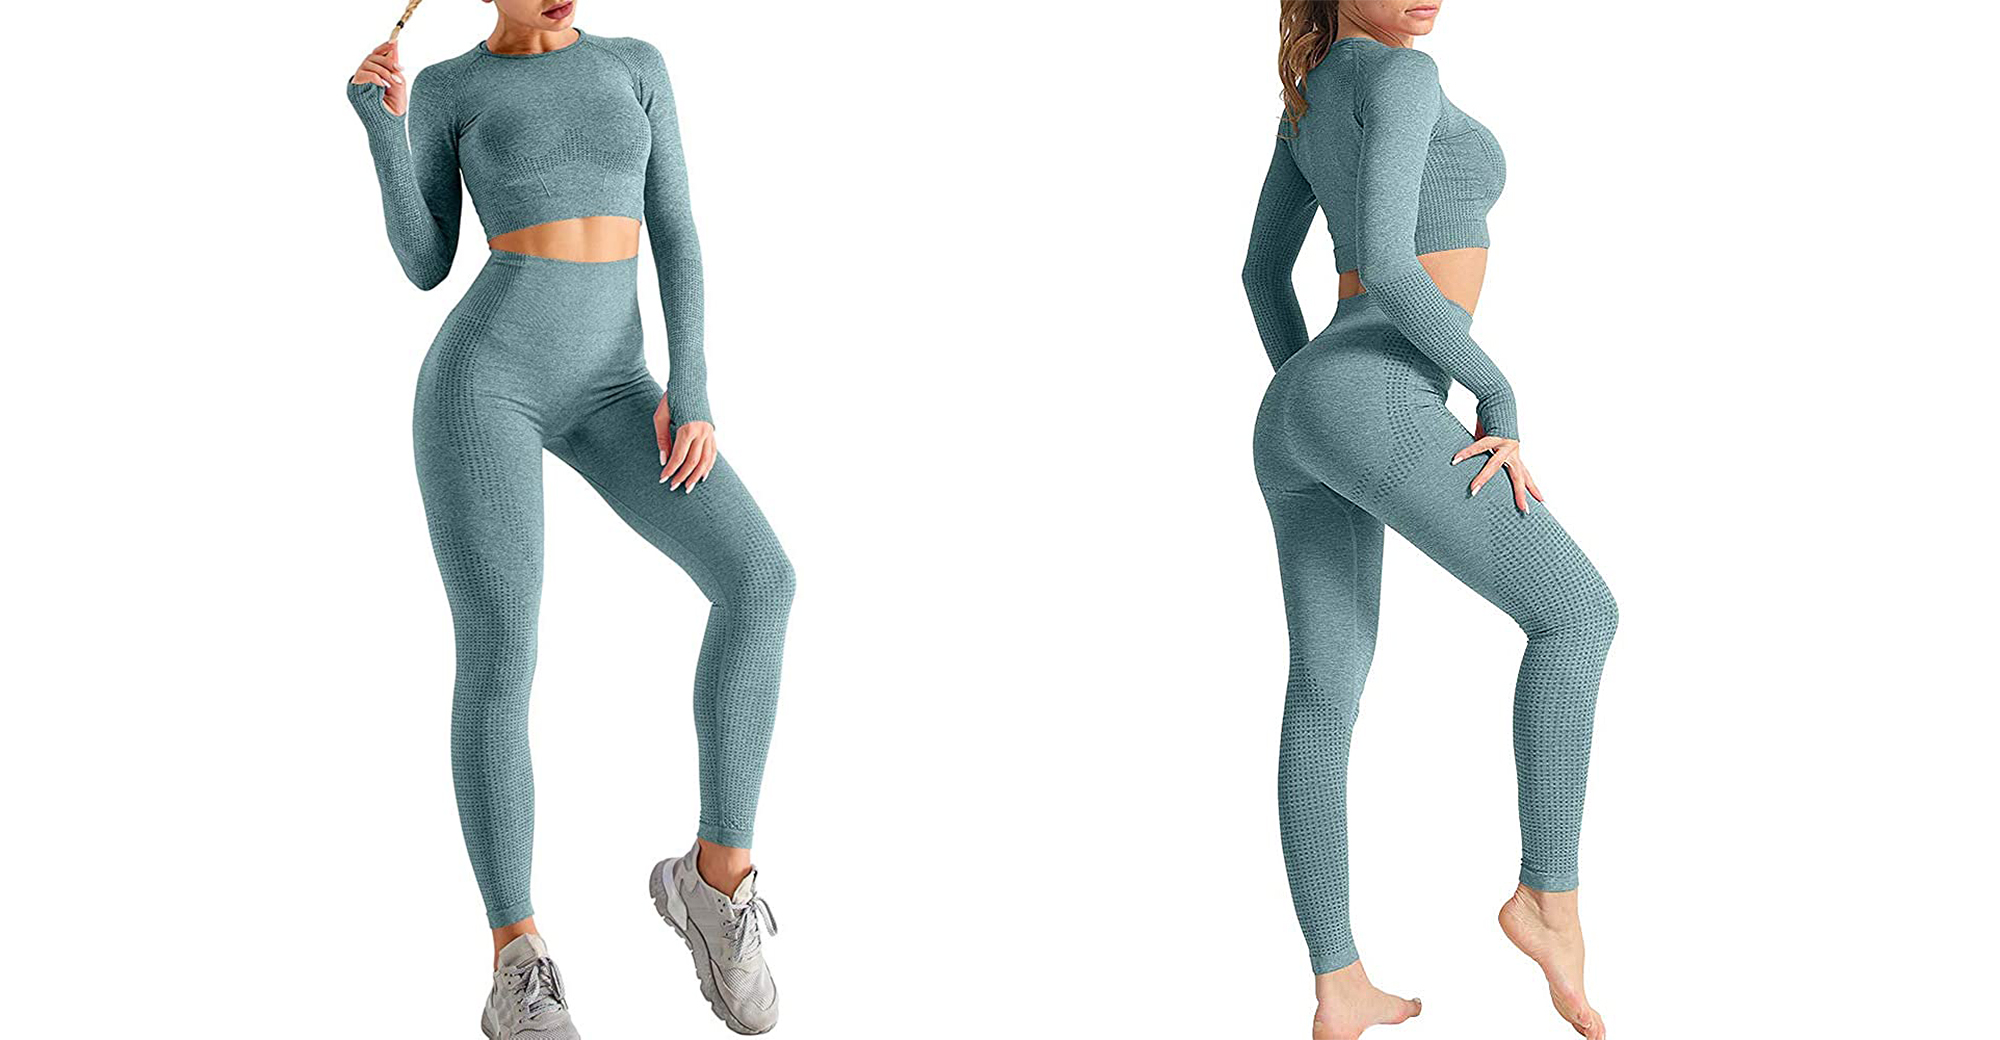  Yoga Outfits For Women 2 Piece Workout Sets